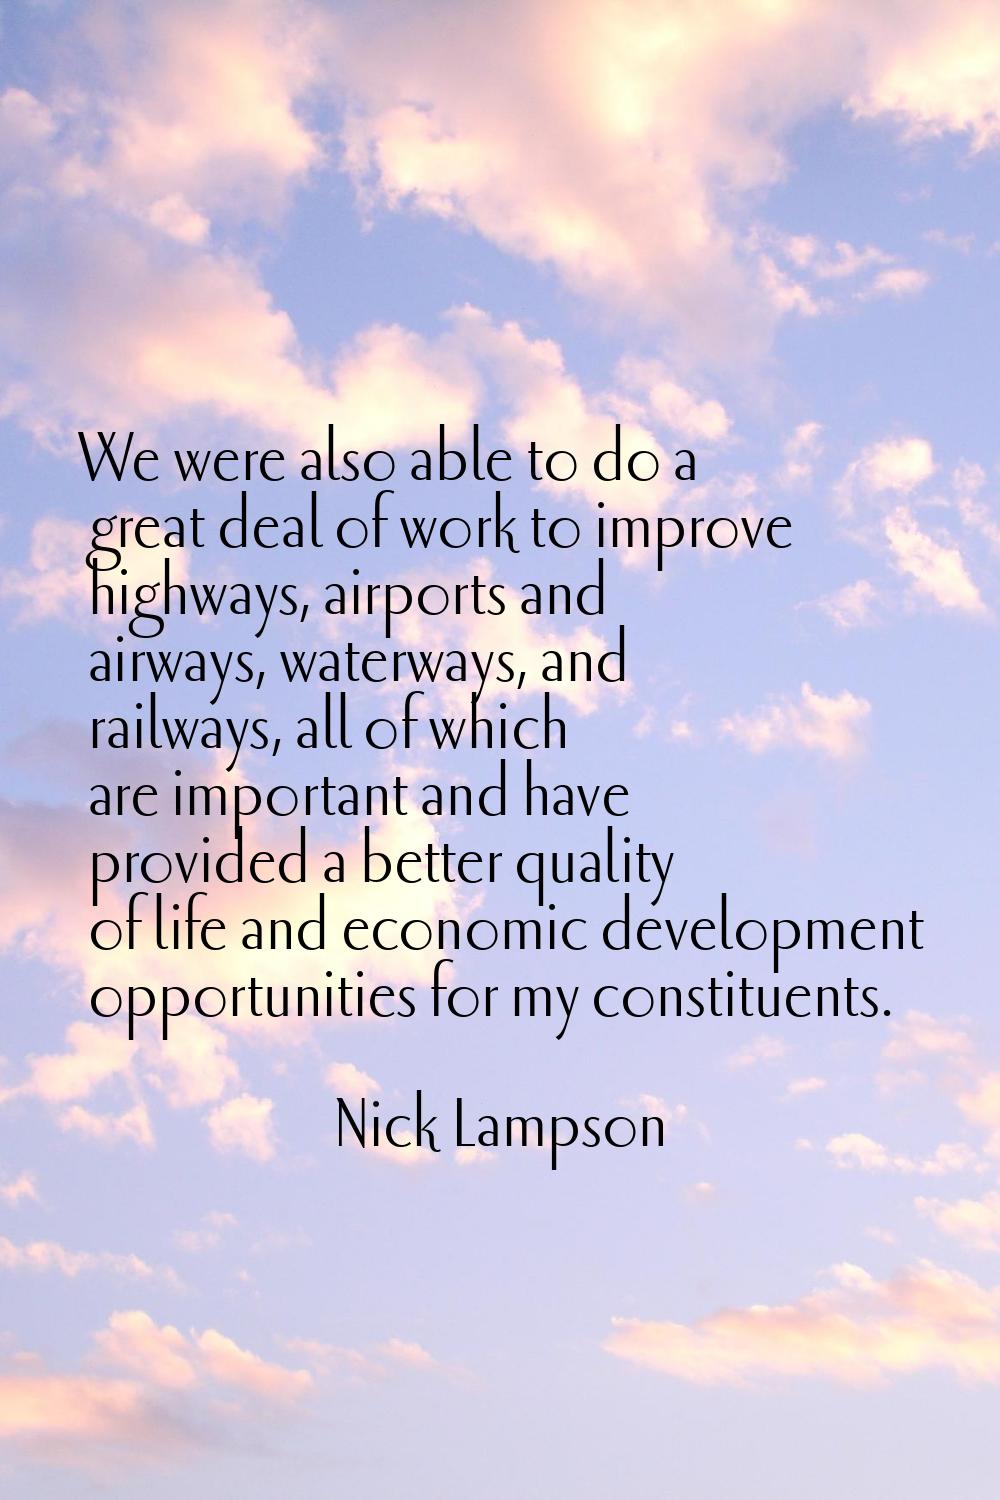 We were also able to do a great deal of work to improve highways, airports and airways, waterways, 